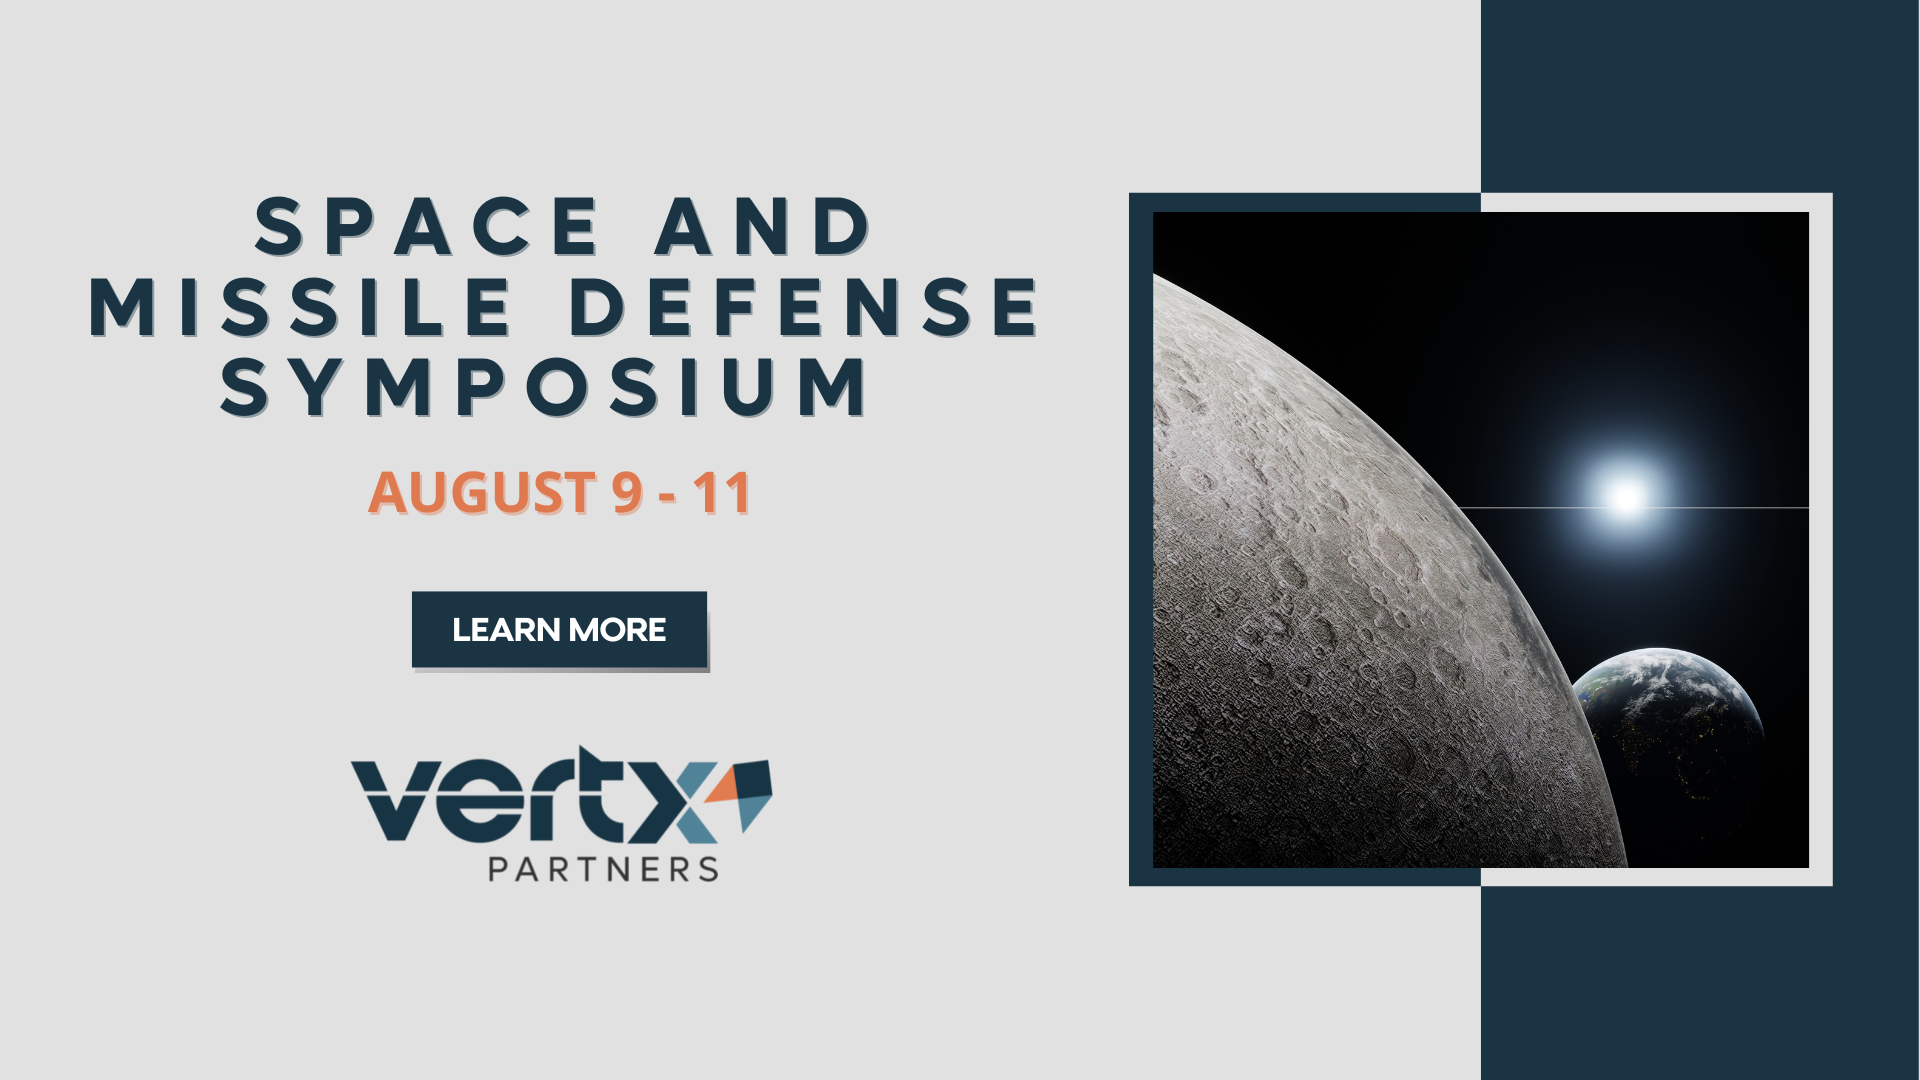 This graphic has the title space and missile defense symposium with the date august 9th through the 11th, there is an image to the right of the title that is the moon with a plant in the background and a white light.